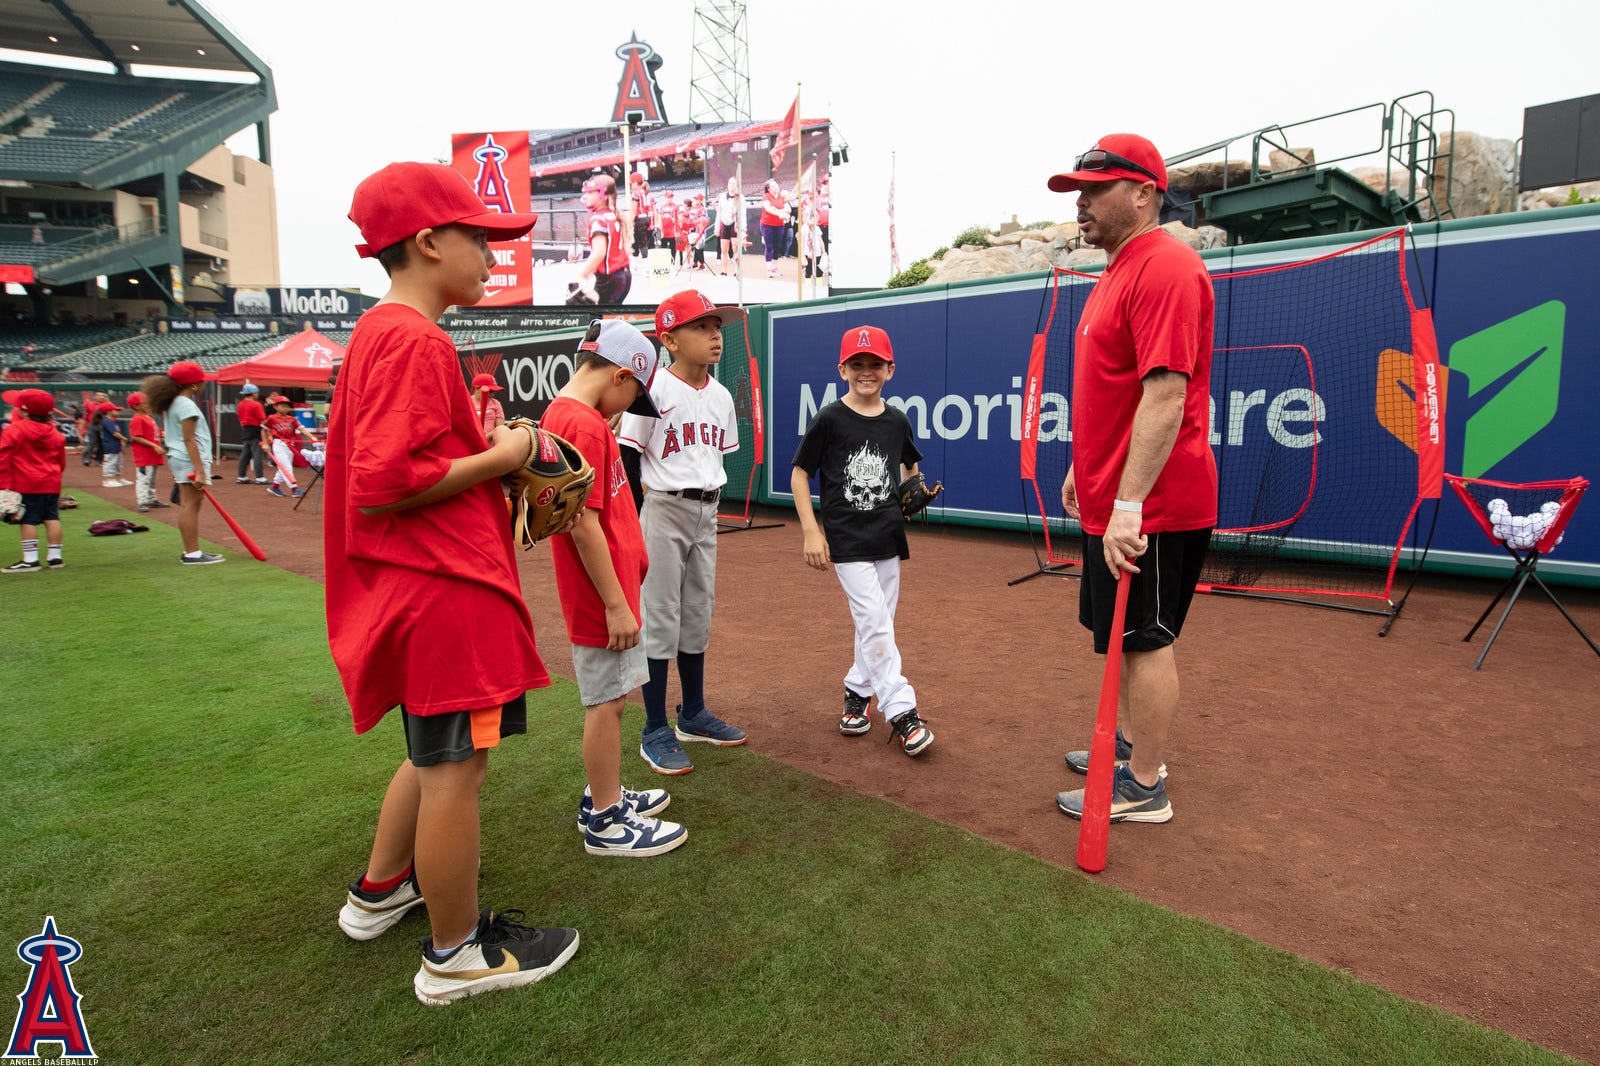 Angels Clemente Clinic, presented by Nike - The Halo Way